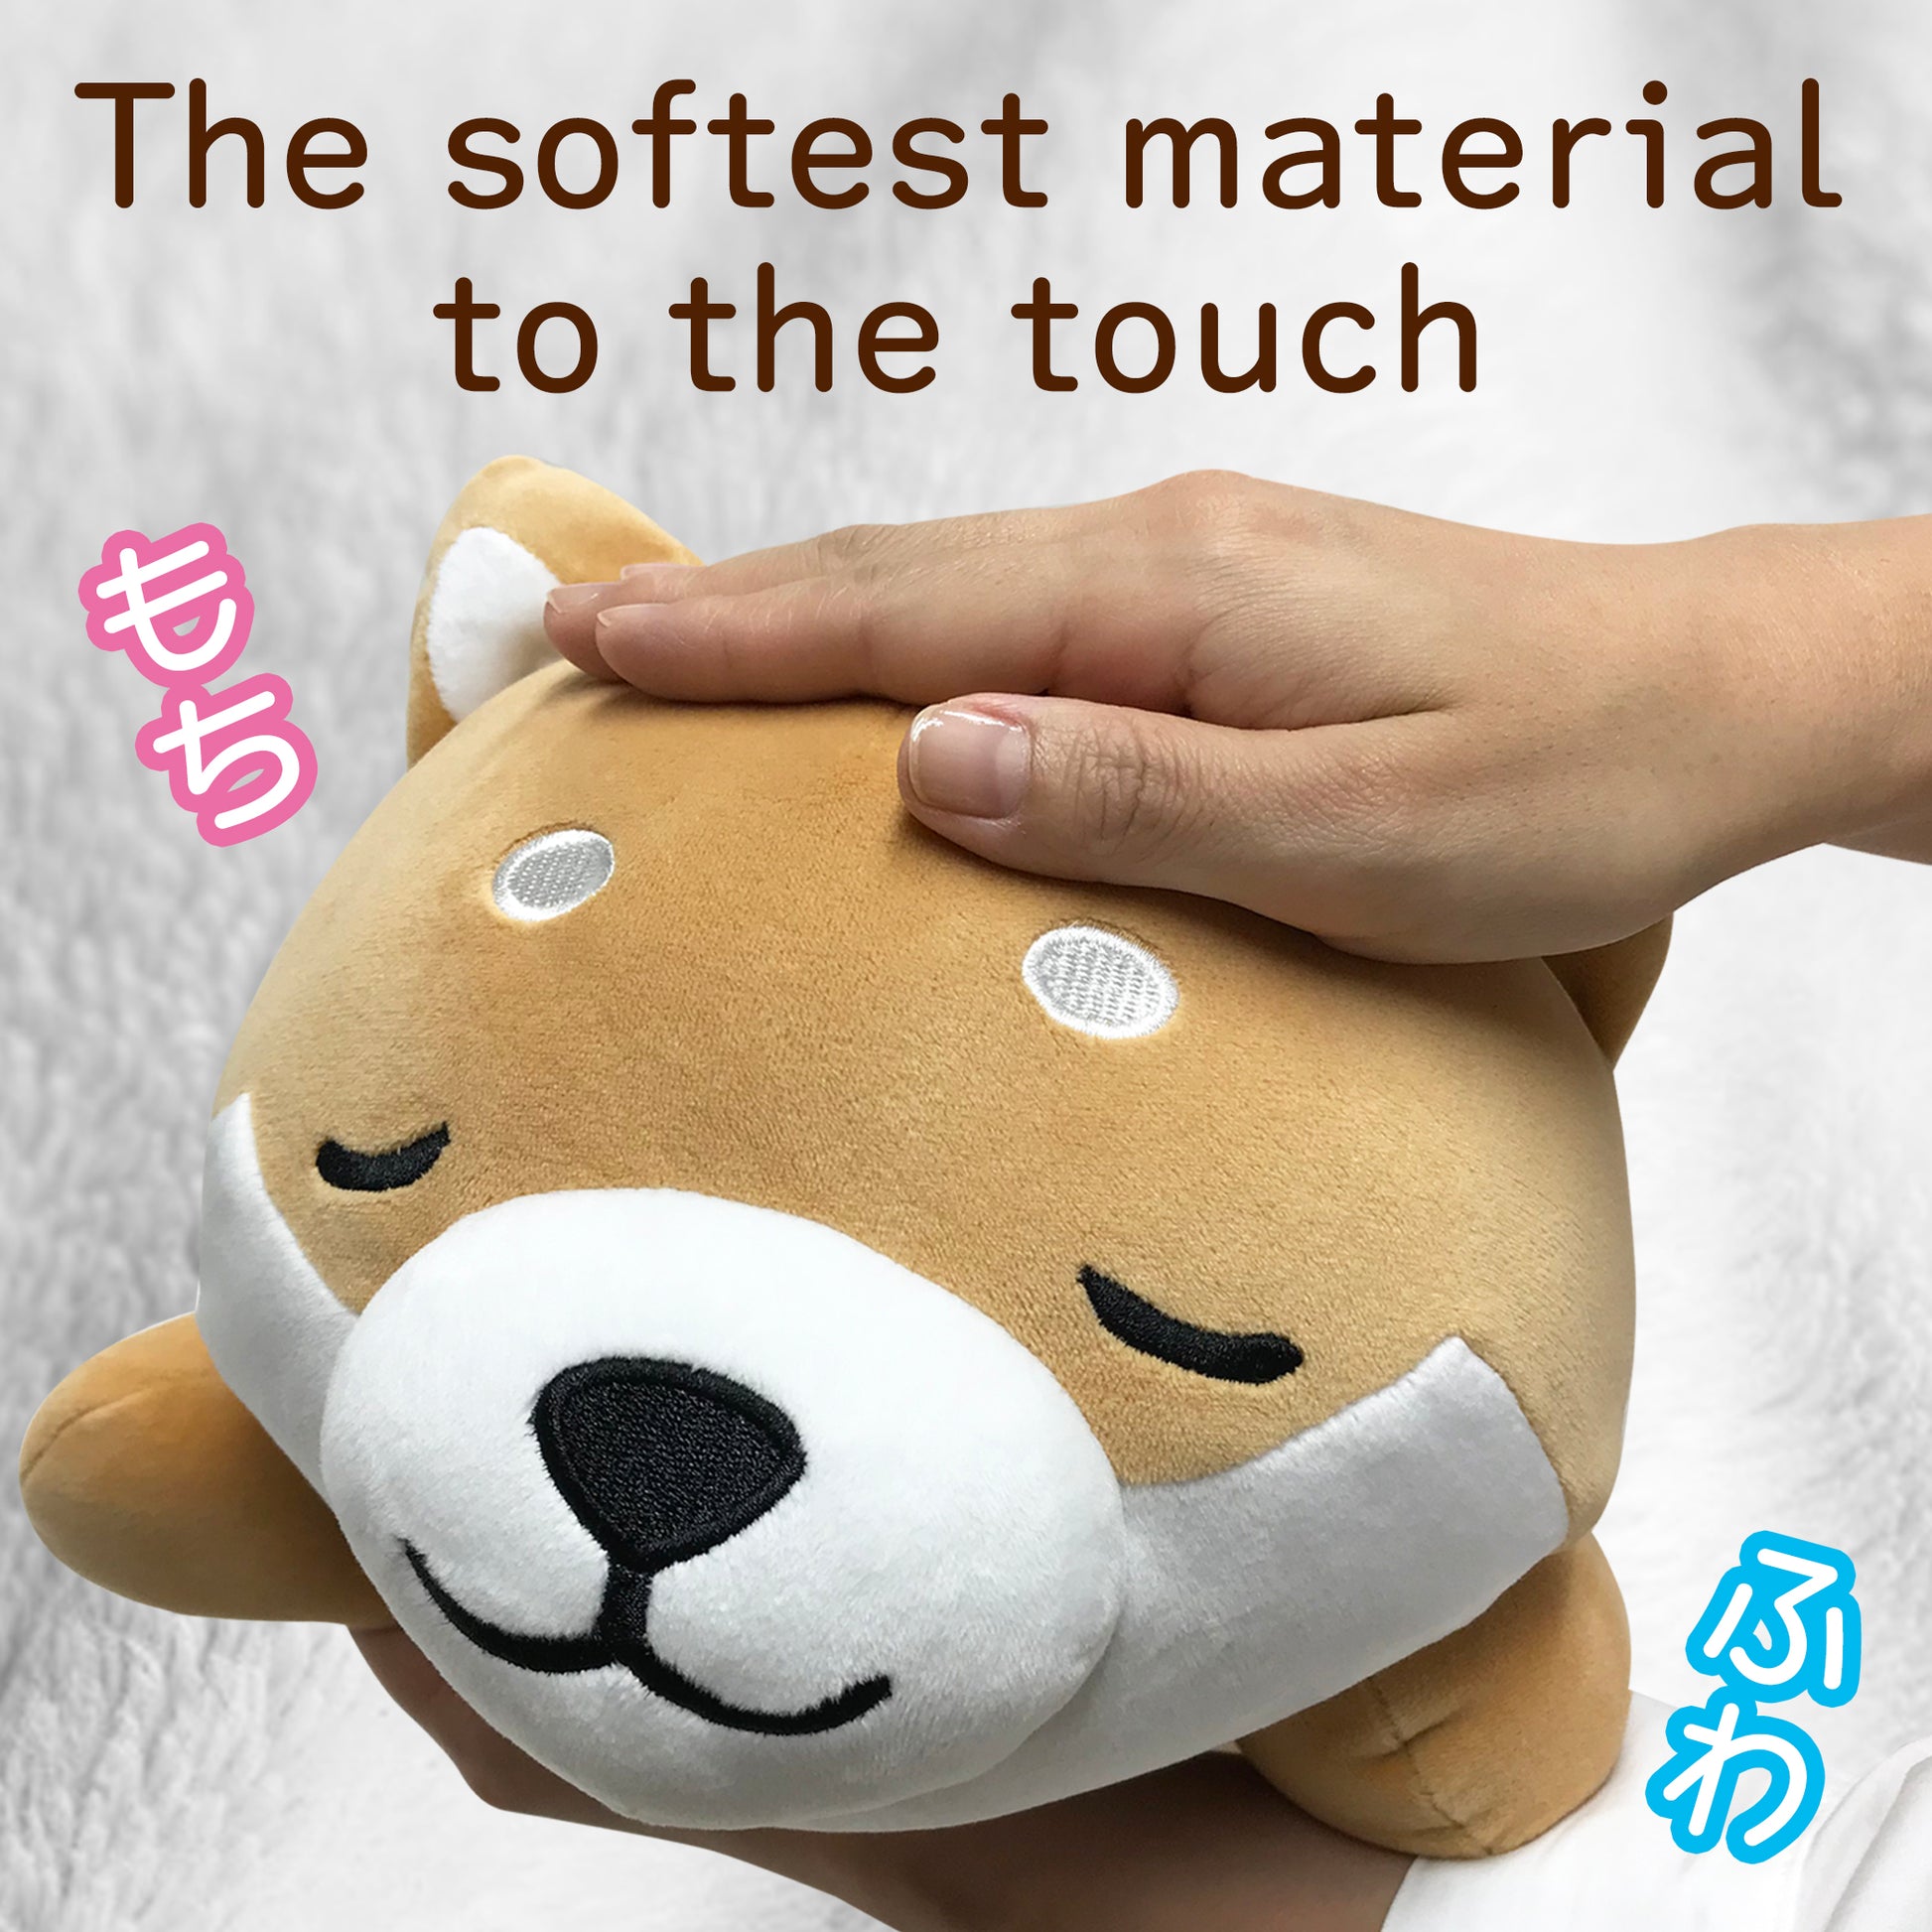 Stuffed dog Mameshiba brown pillow is the softest material to the touch.